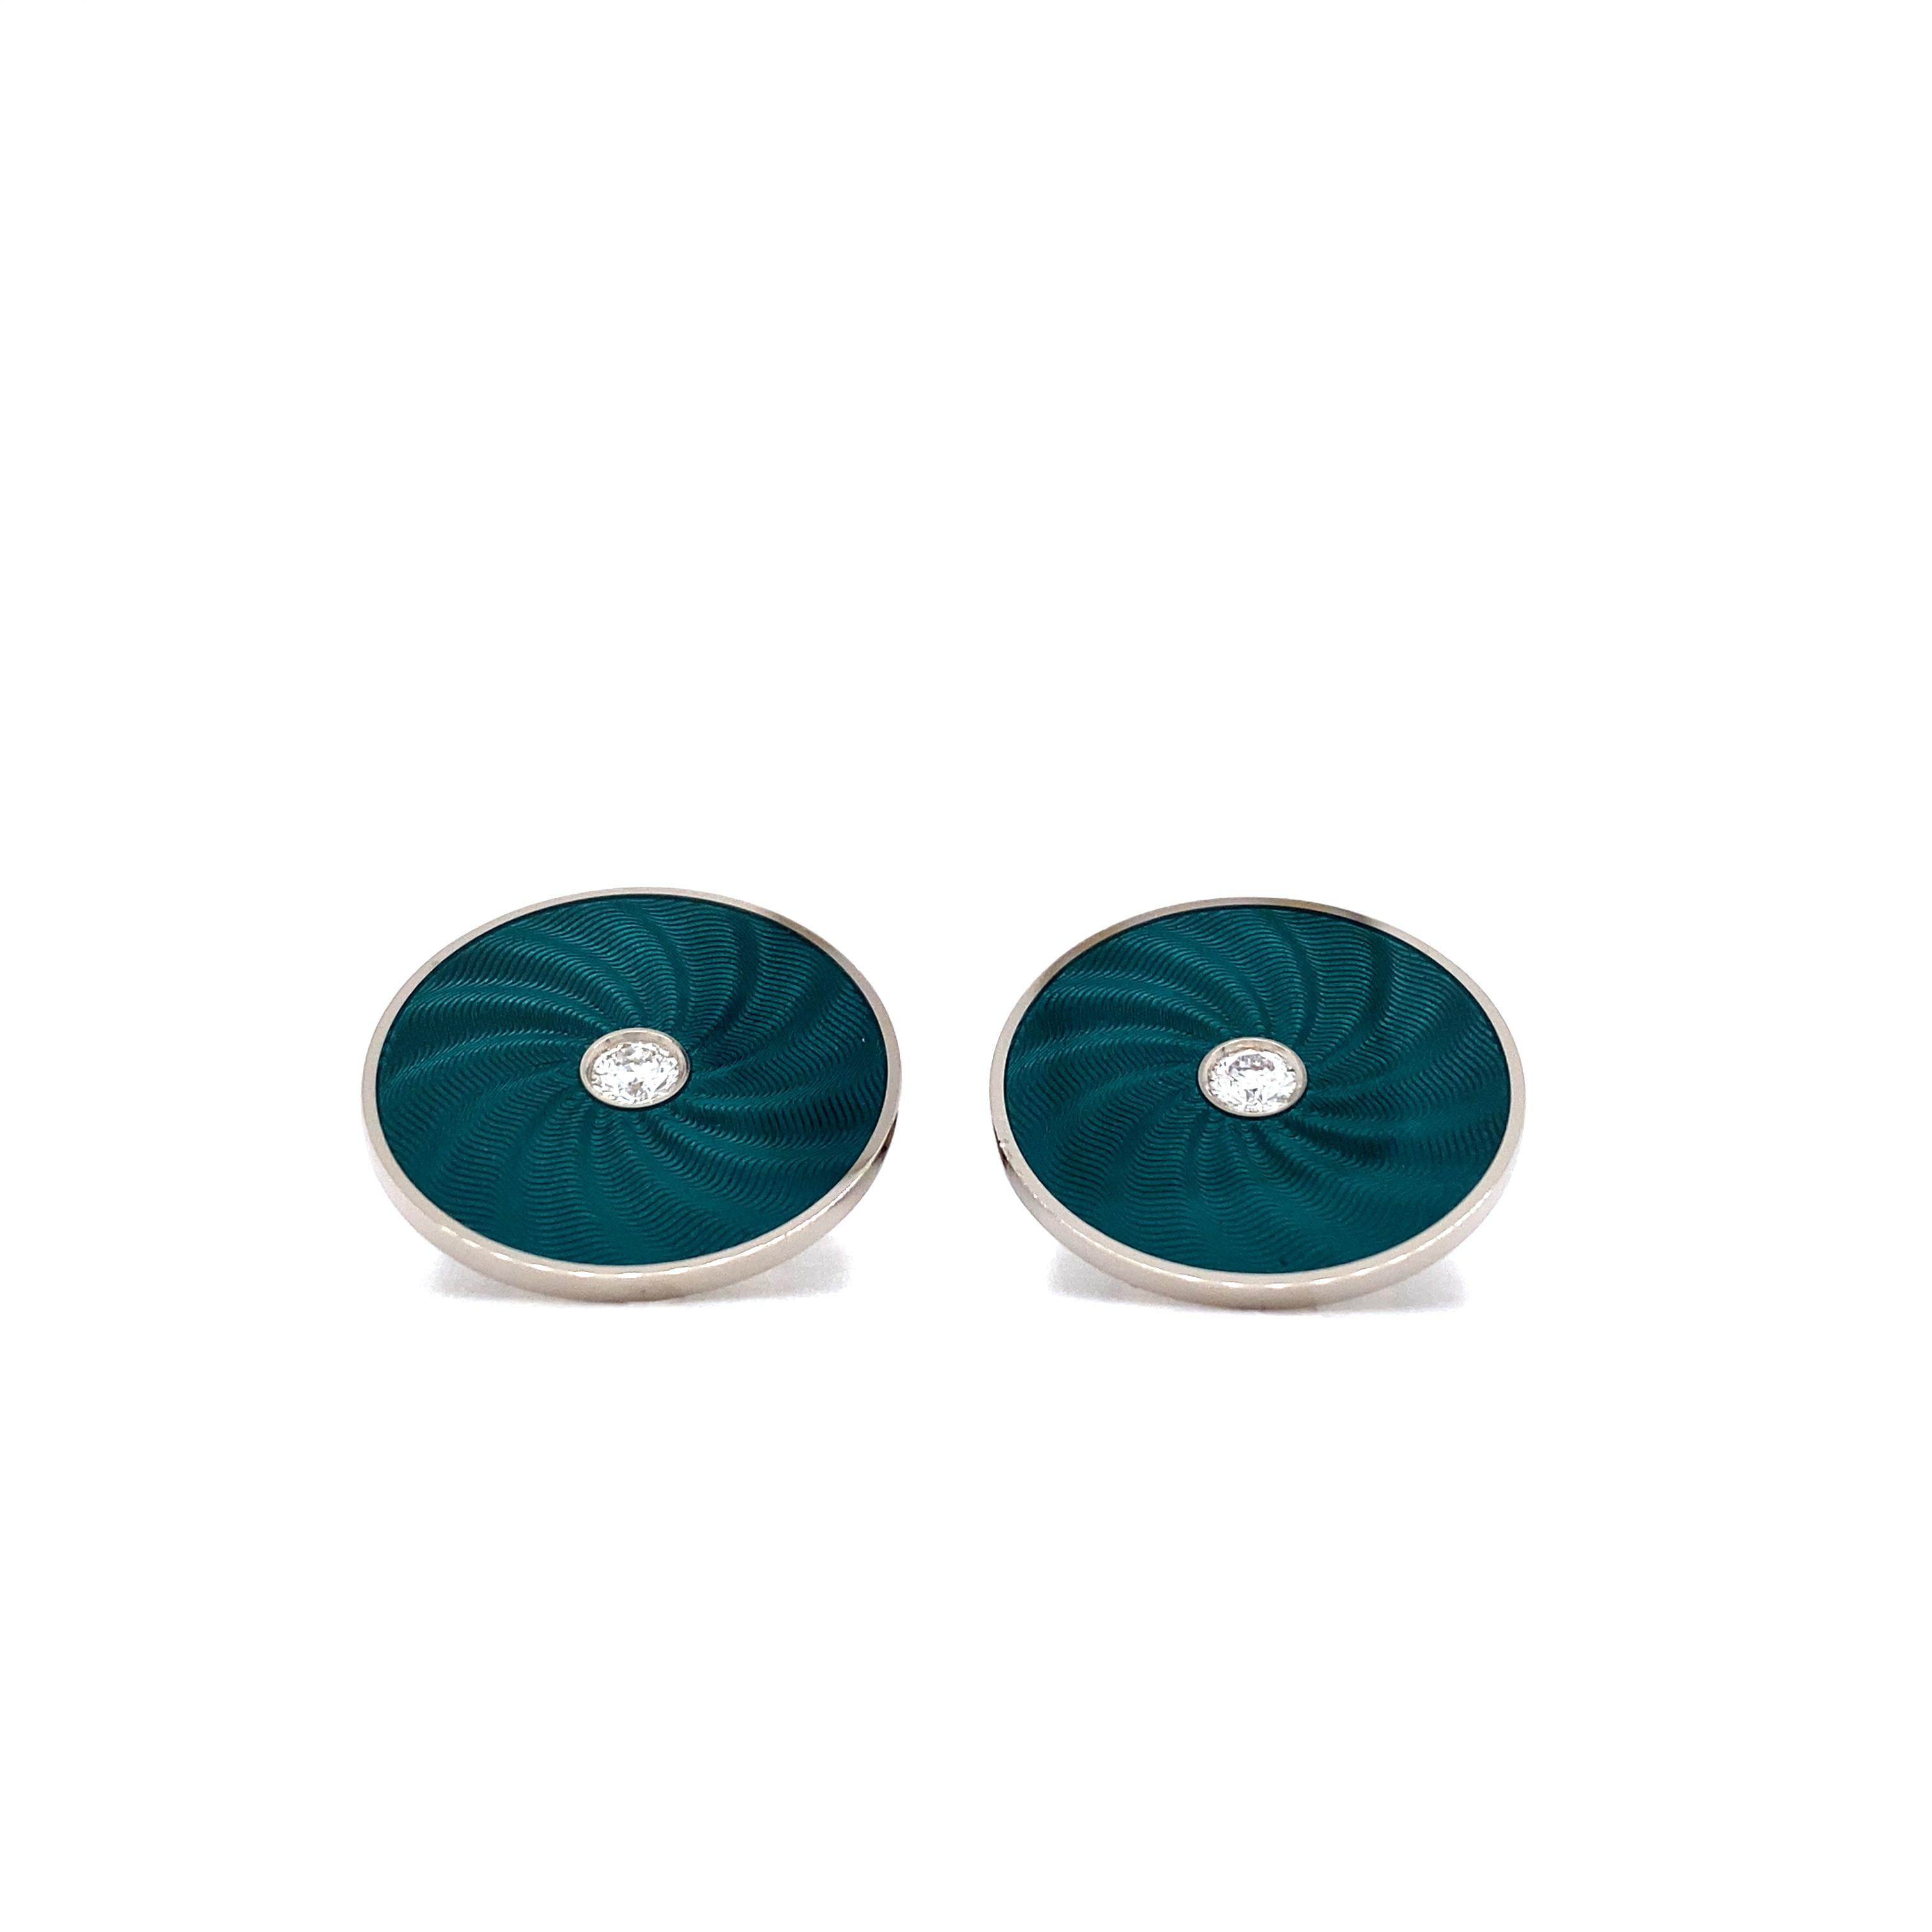 Victor Mayer Round Cufflinks 18k White Gold with Diamonds & Emerald Green Guilloche Enamel

Cuff links, 18k white gold, guilloche, vitreous enamel, 2 diamonds total 0,26 ct, G VS
Reference: V1057/SG/00/00/101
Material: 18k white gold
Vitreous